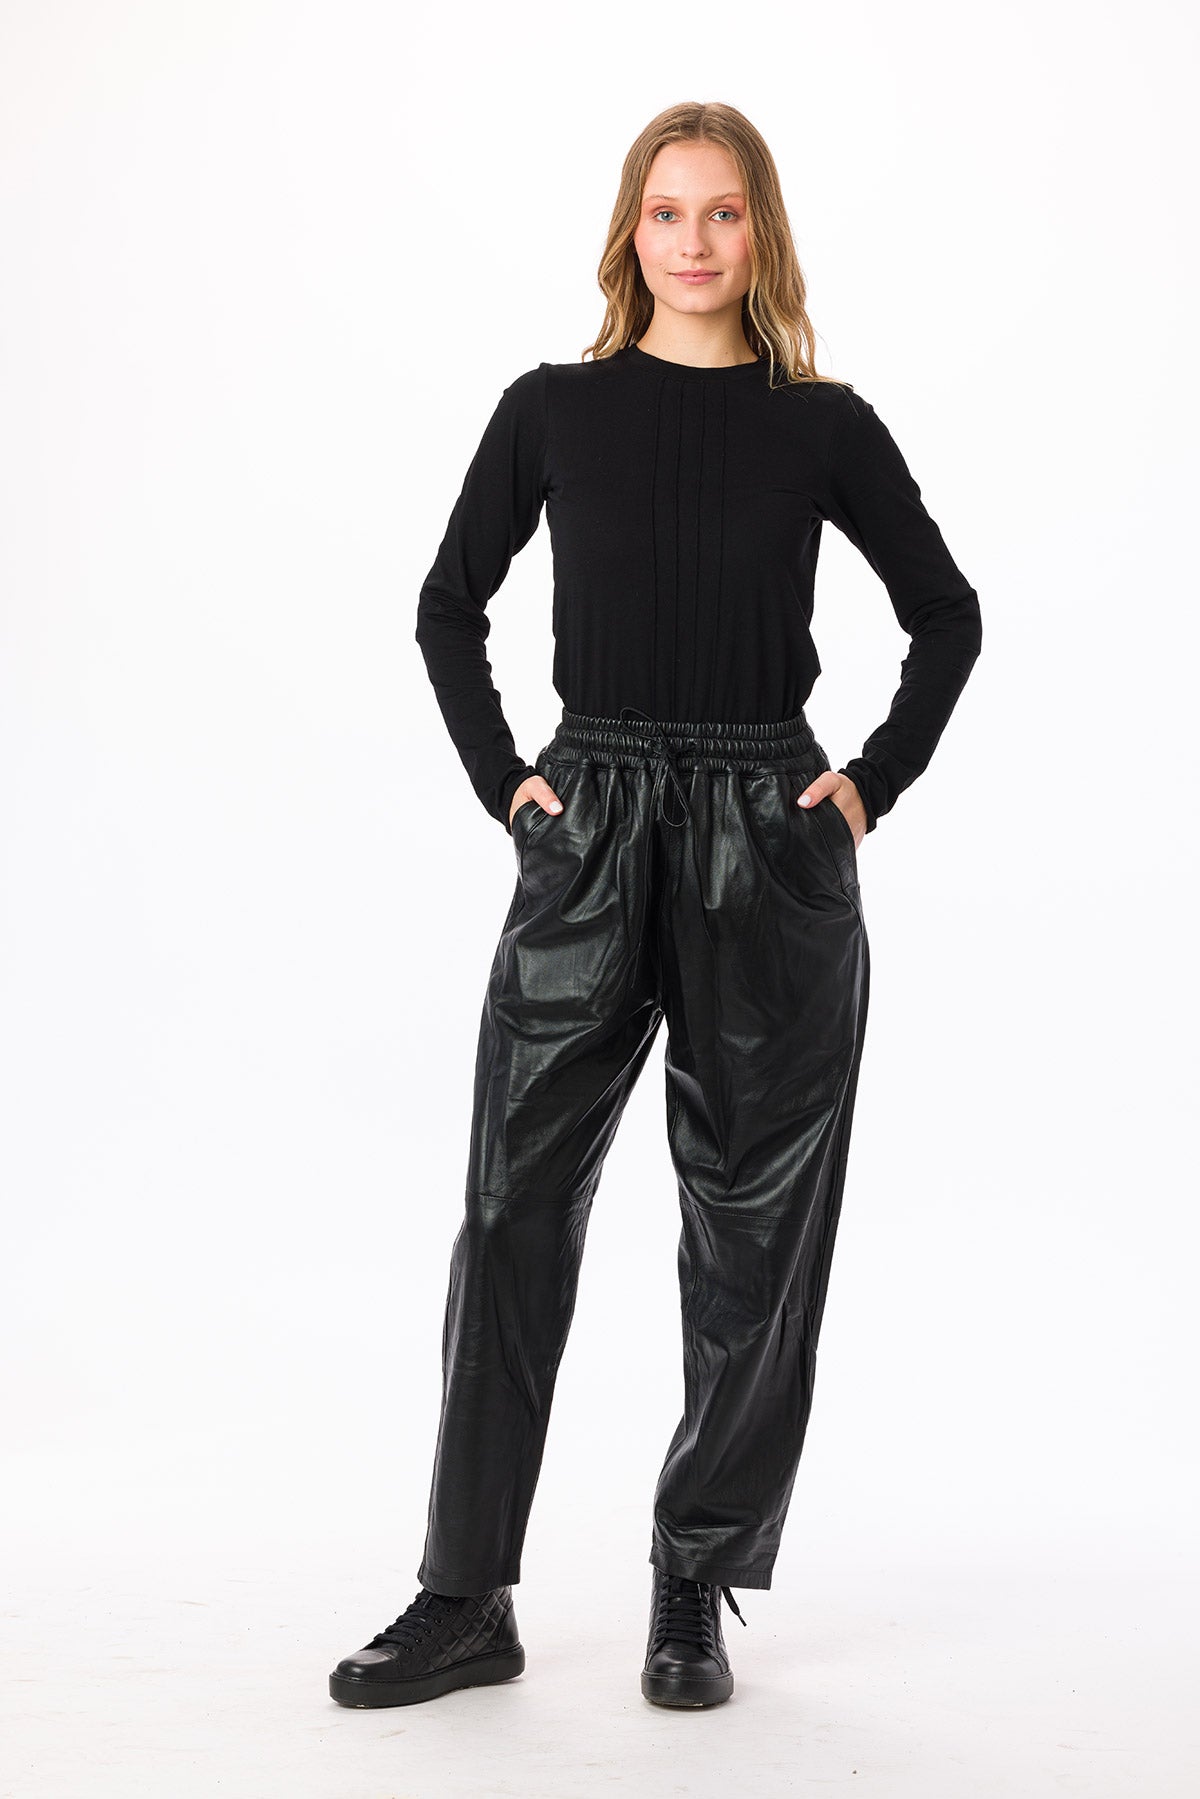 ASOS Design Faux Leather Pants Size US 8 Black Bottoms Solid Women's Casual  New | eBay